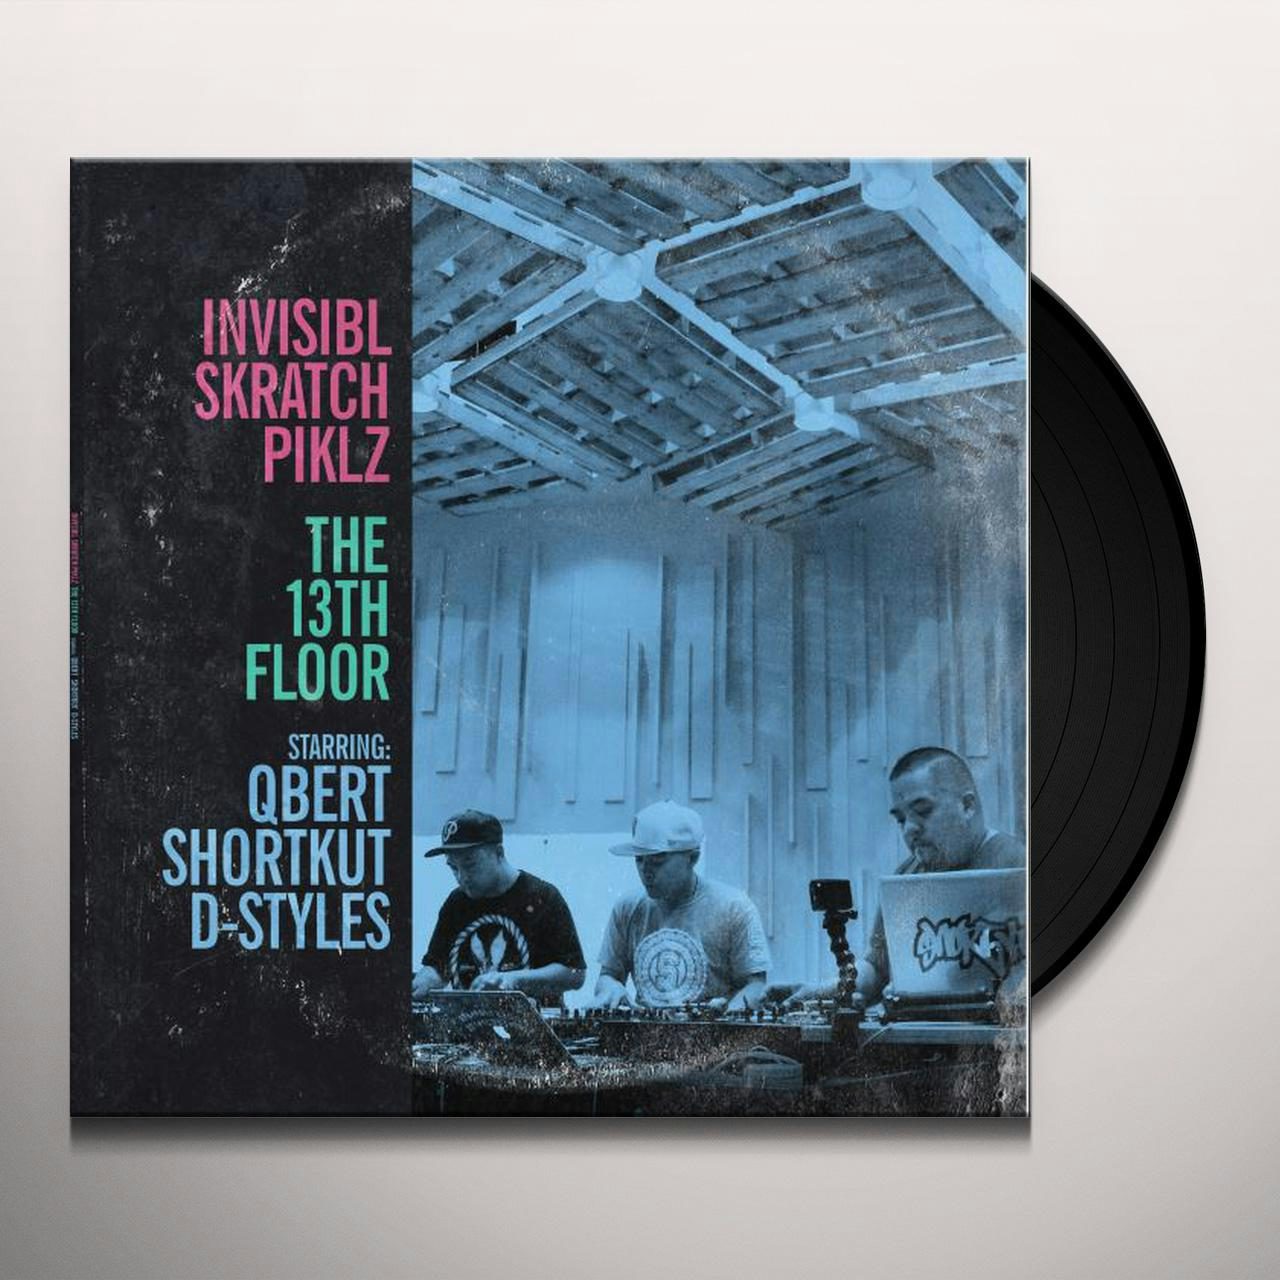 INVISIBLE SKRATCH PIKLS / The 13th Floor - 洋楽